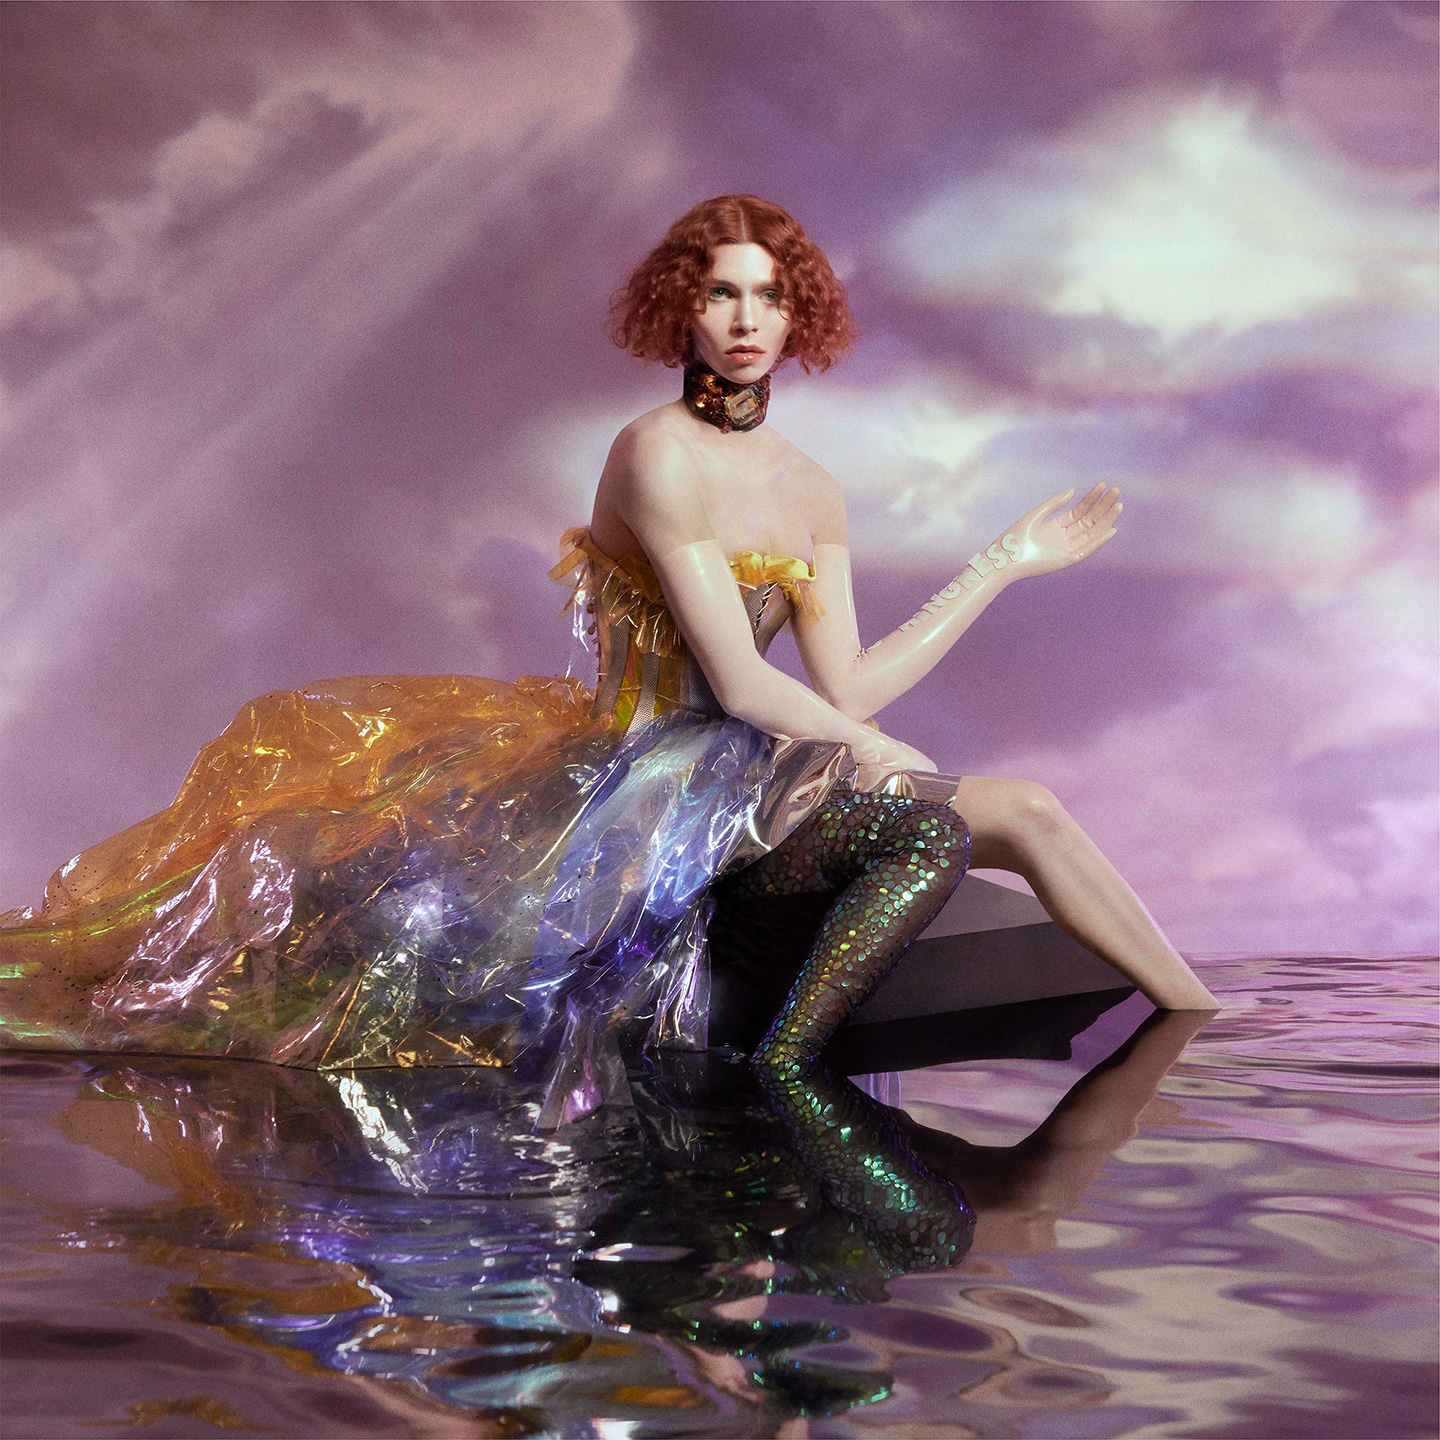 REVIEW: SOPHIE - 'Oil Of Every Pearl's Un-Insides' (Transgressive